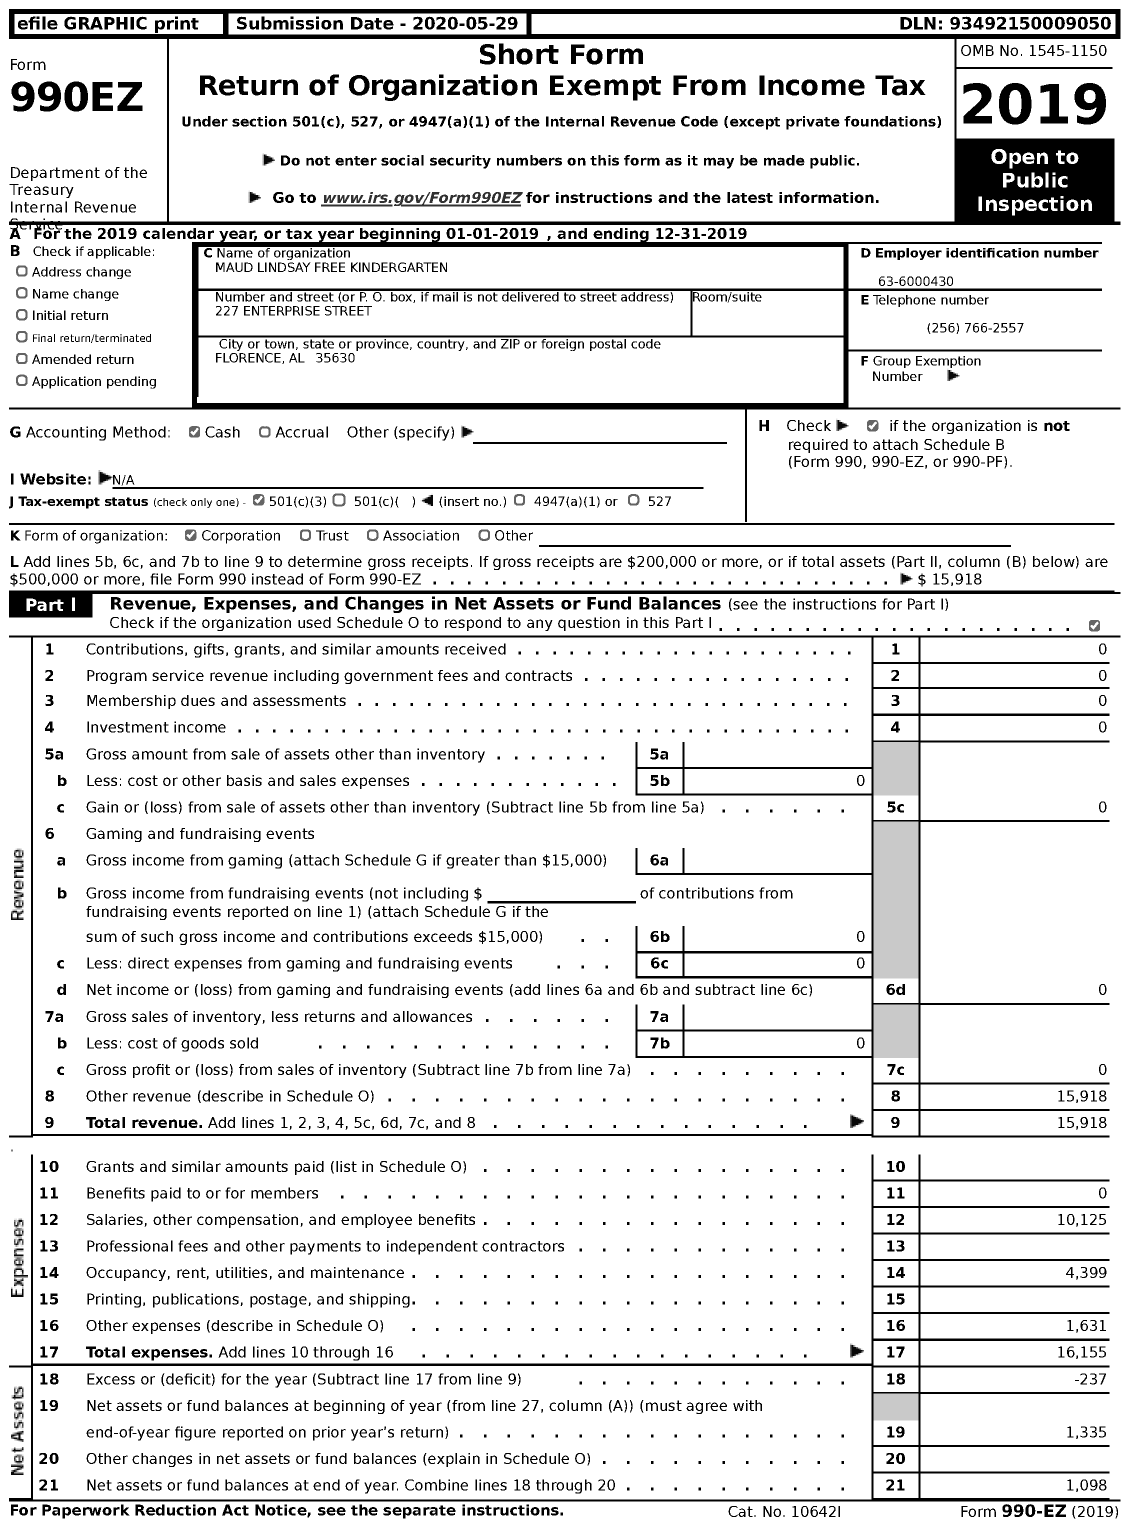 Image of first page of 2019 Form 990EZ for Maud Lindsay Free Kindergarten